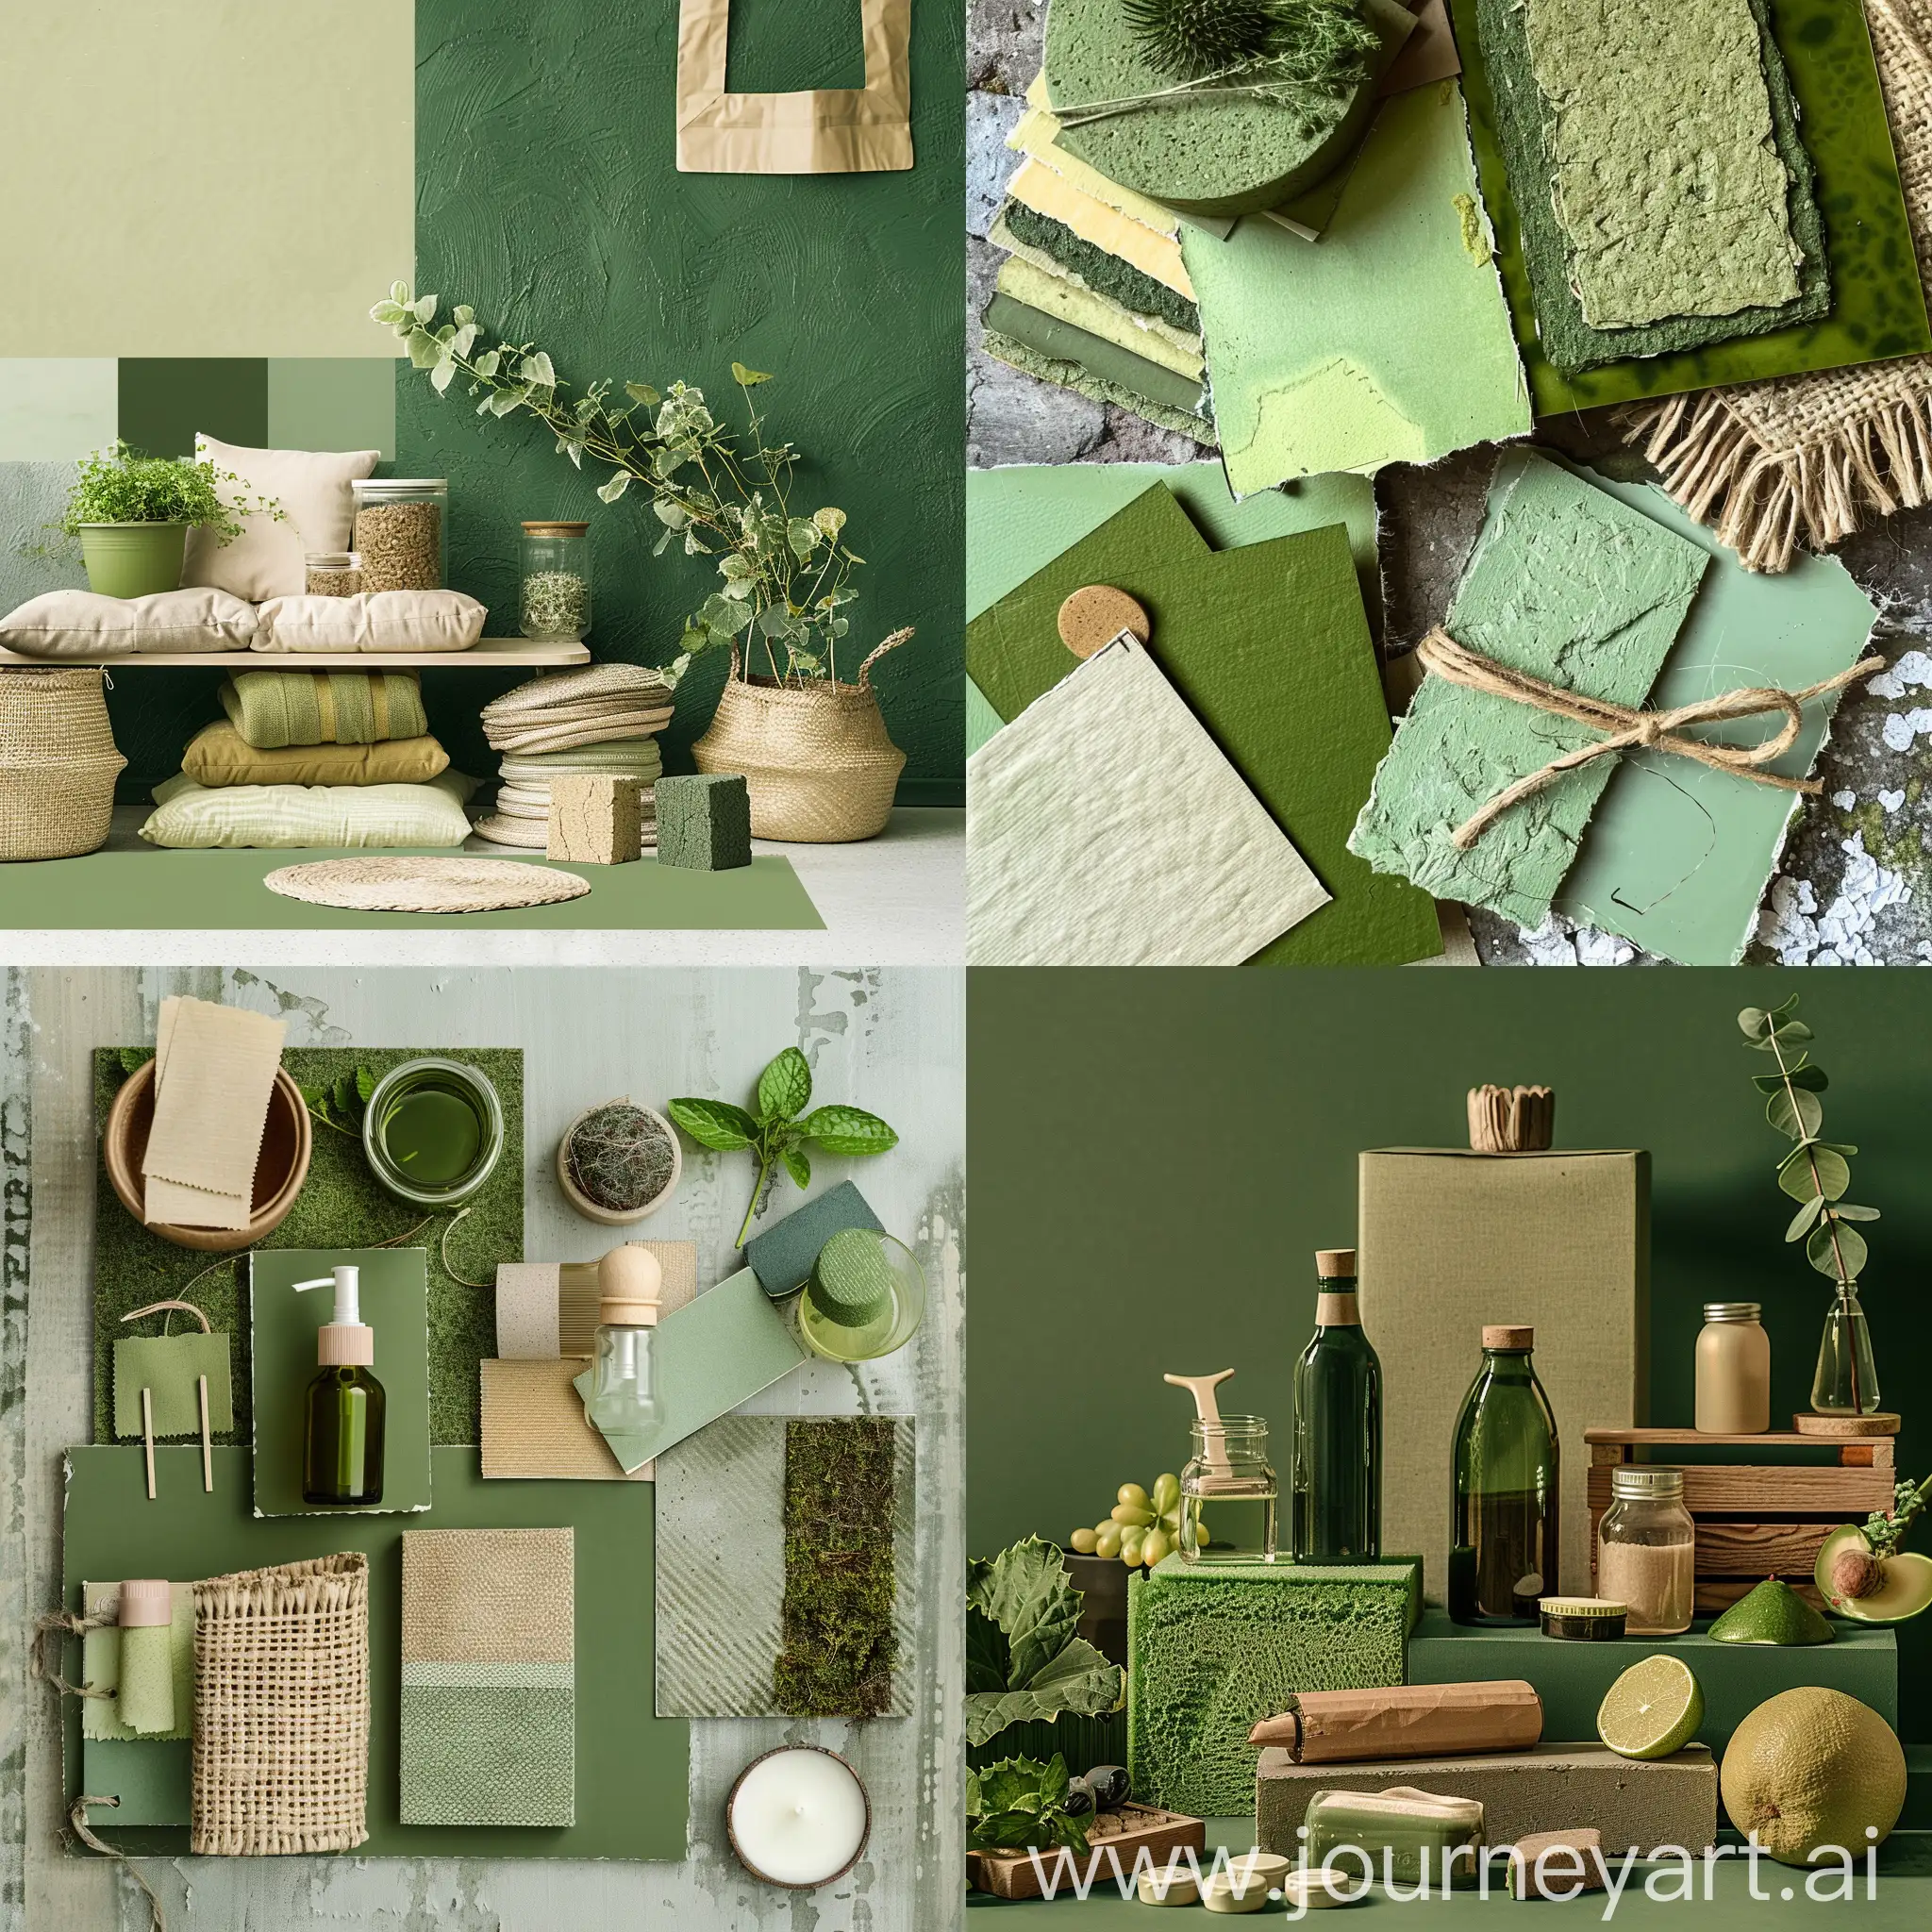 Sustainable-Living-EcoFriendly-Lifestyle-in-Earthy-Tones